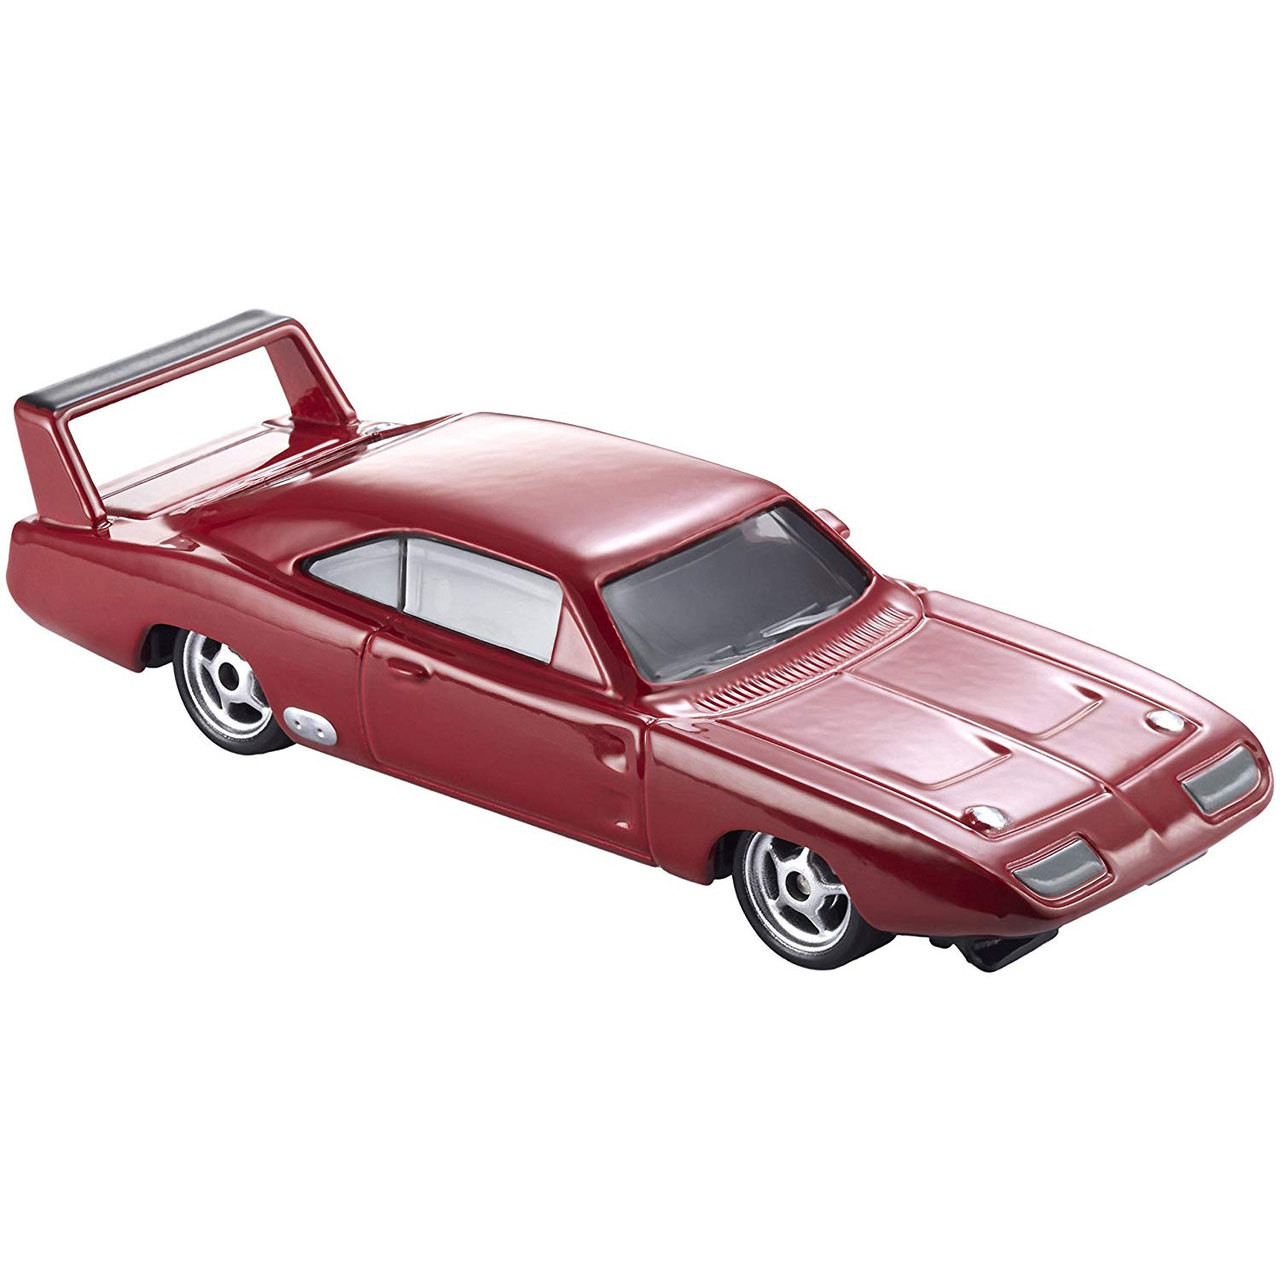 Fast & Furious 1969 DODGE CHARGER DAYTONA 1:55 Scale Die-Cast Vehicle -  Bubble-n-Squeak Toys